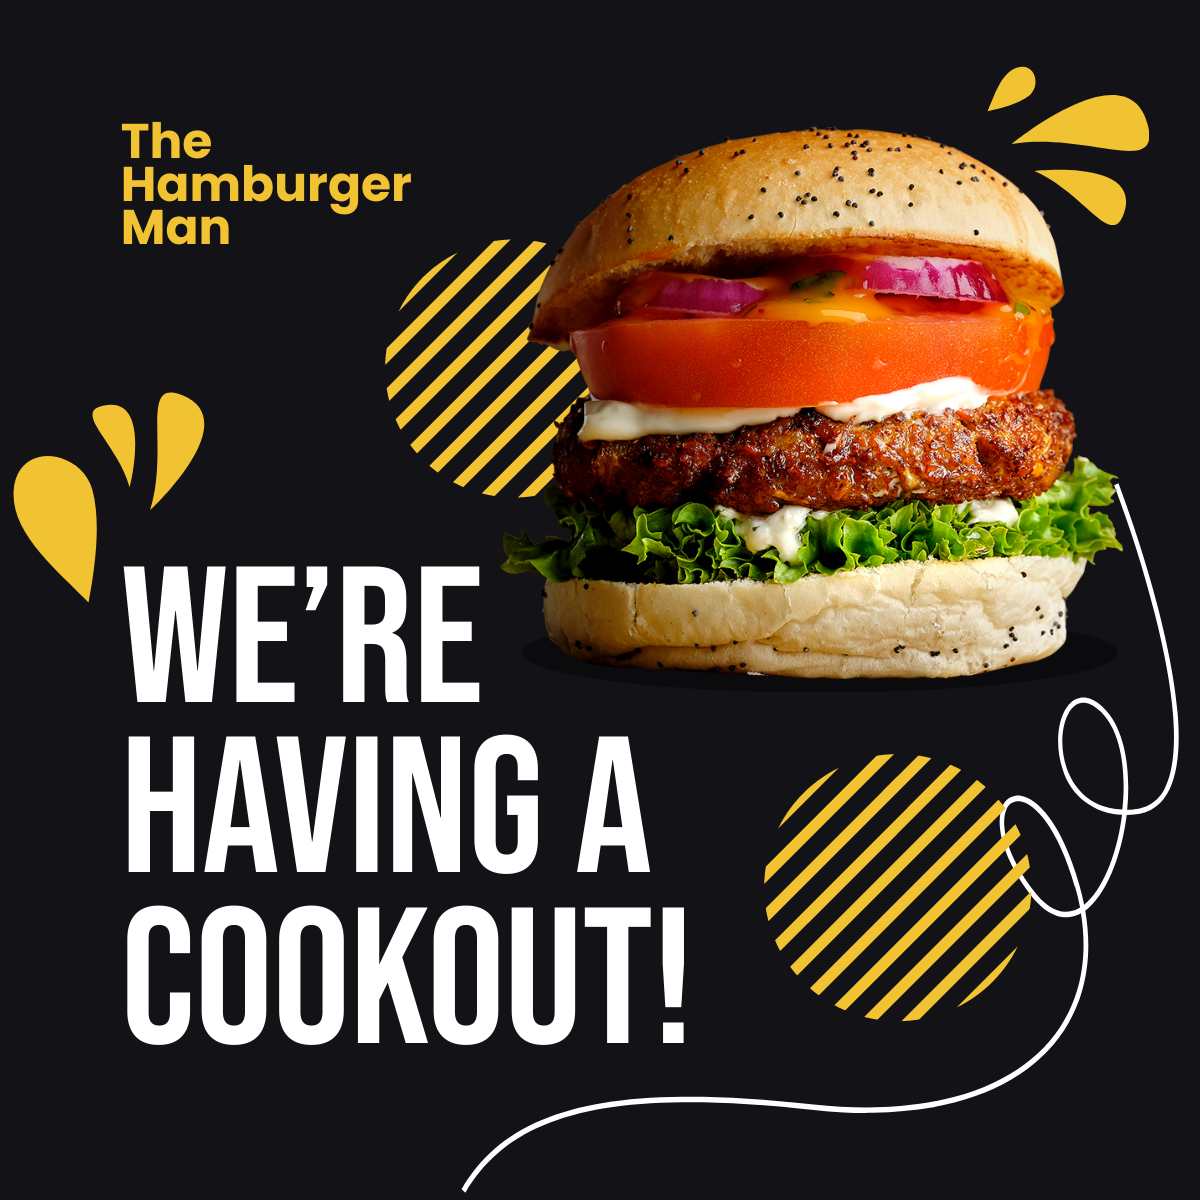 Free Cookout Invitation Linkedin Post Template